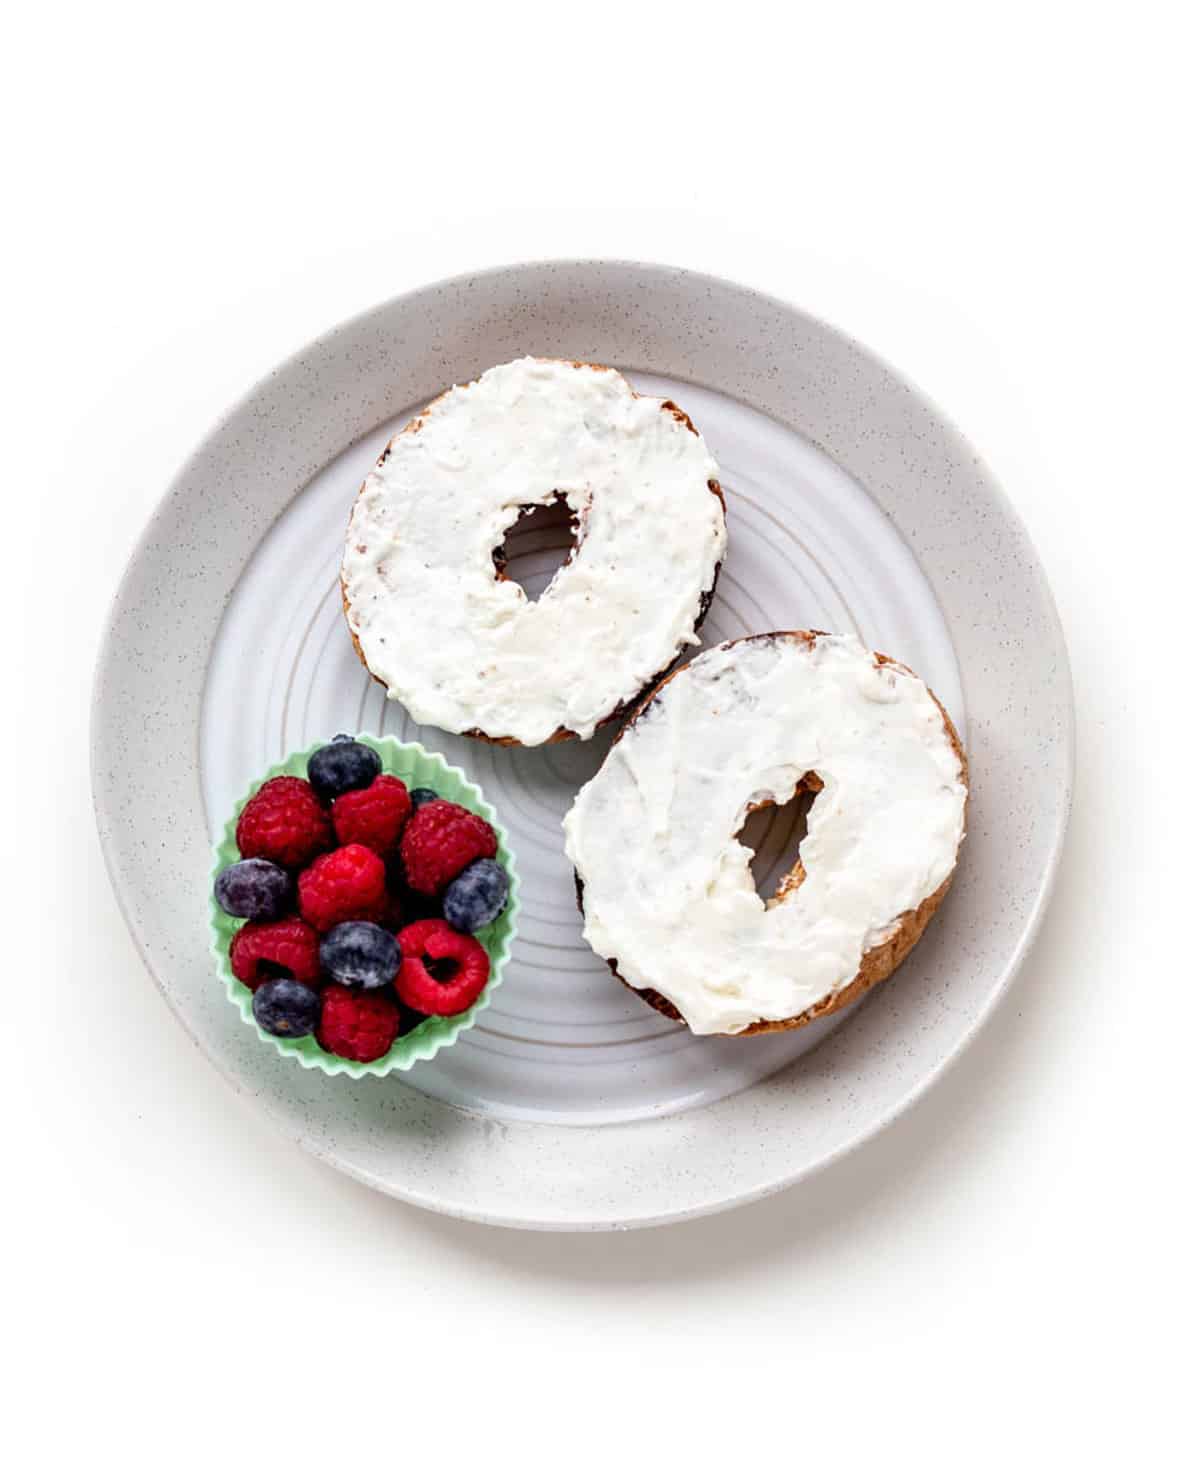 Bagel with cream cheese next to a cup of mixed berries on a plate.